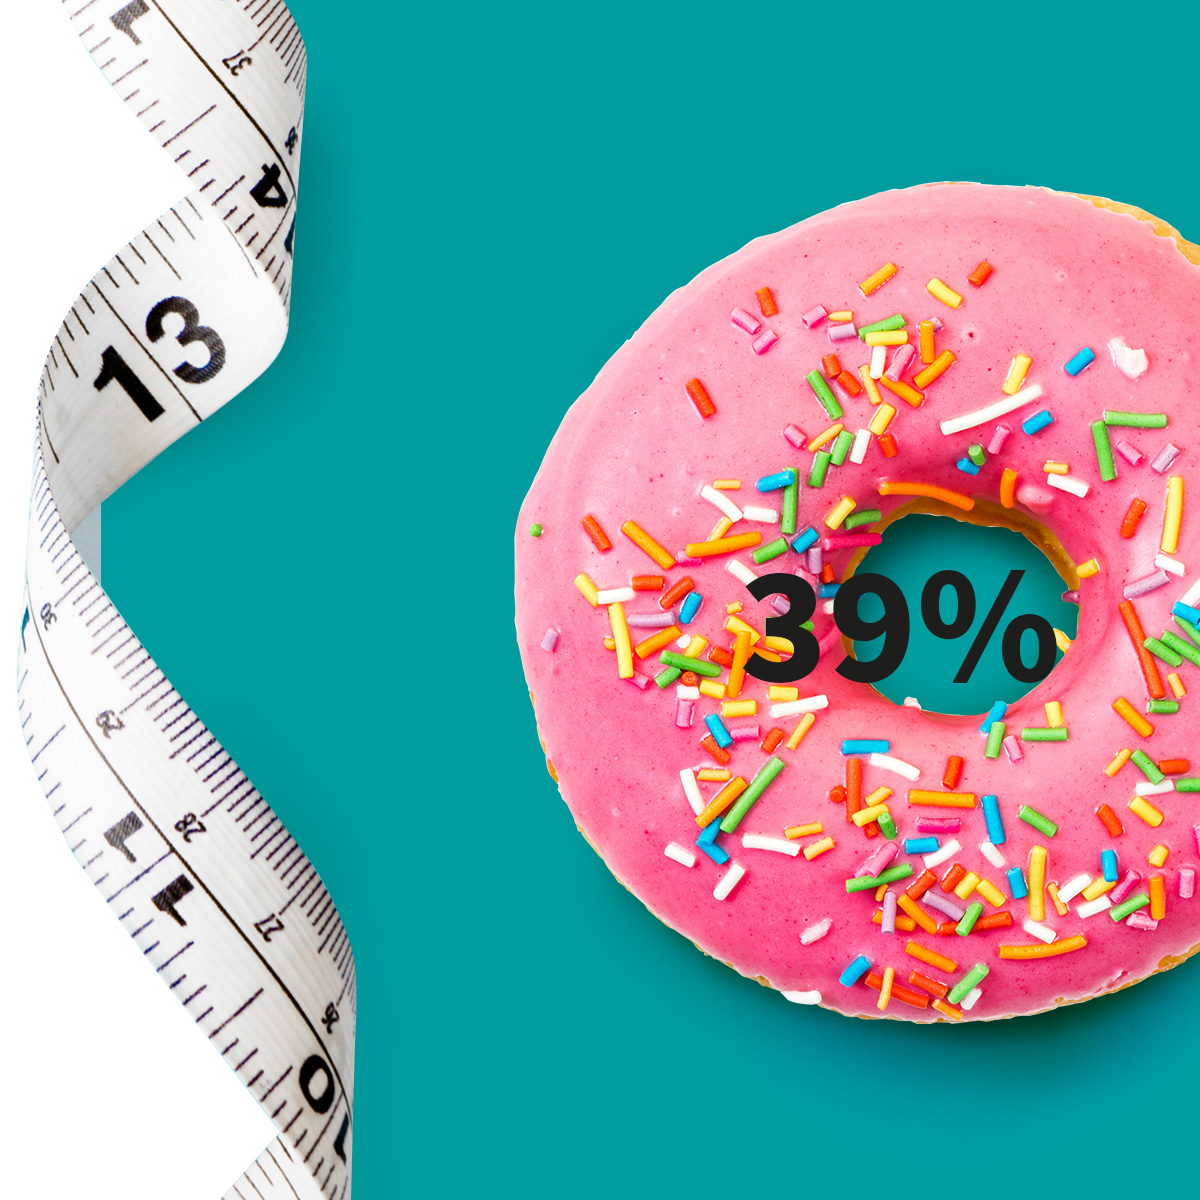 [.DK-dk Denmark (danish)] •	A measuring tape and a doughnut with pink icing and colourful sugar sprinkle as a metaphor for obesity